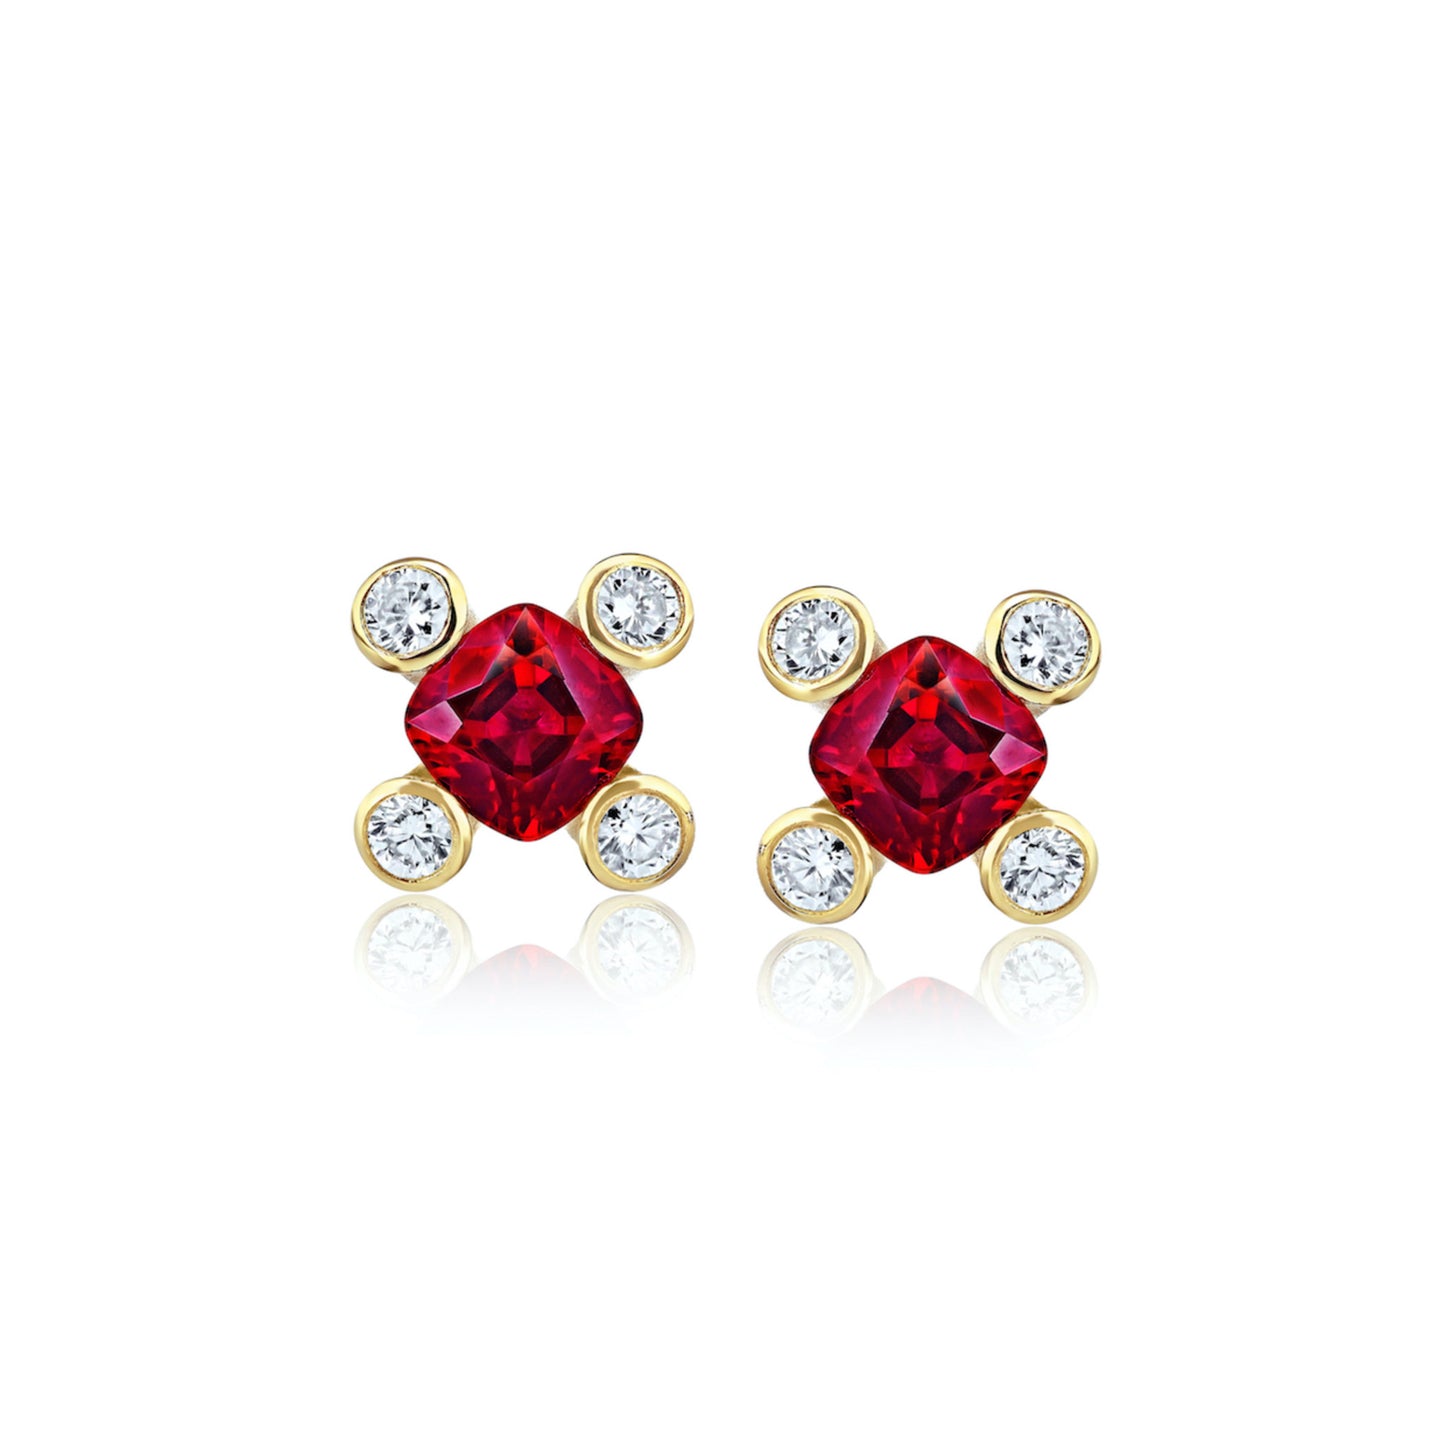 Contemporary 18KT Yellow Gold Ruby & Diamond Earrings front